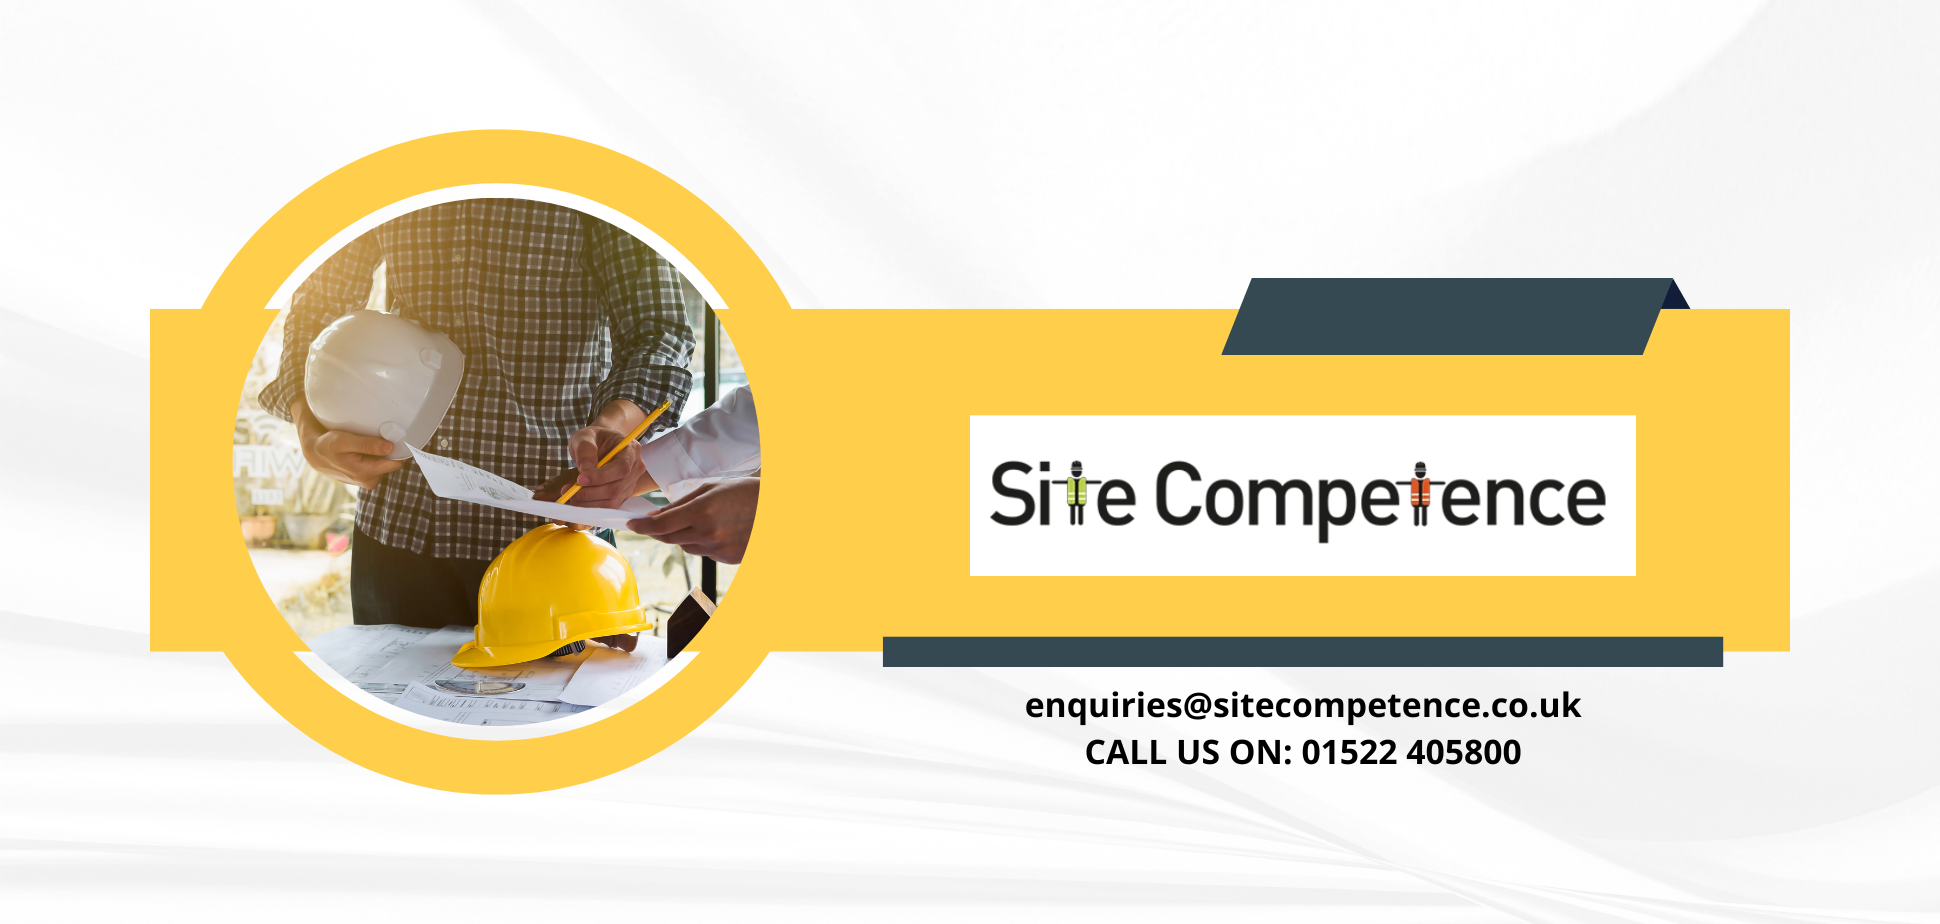 Site Competence